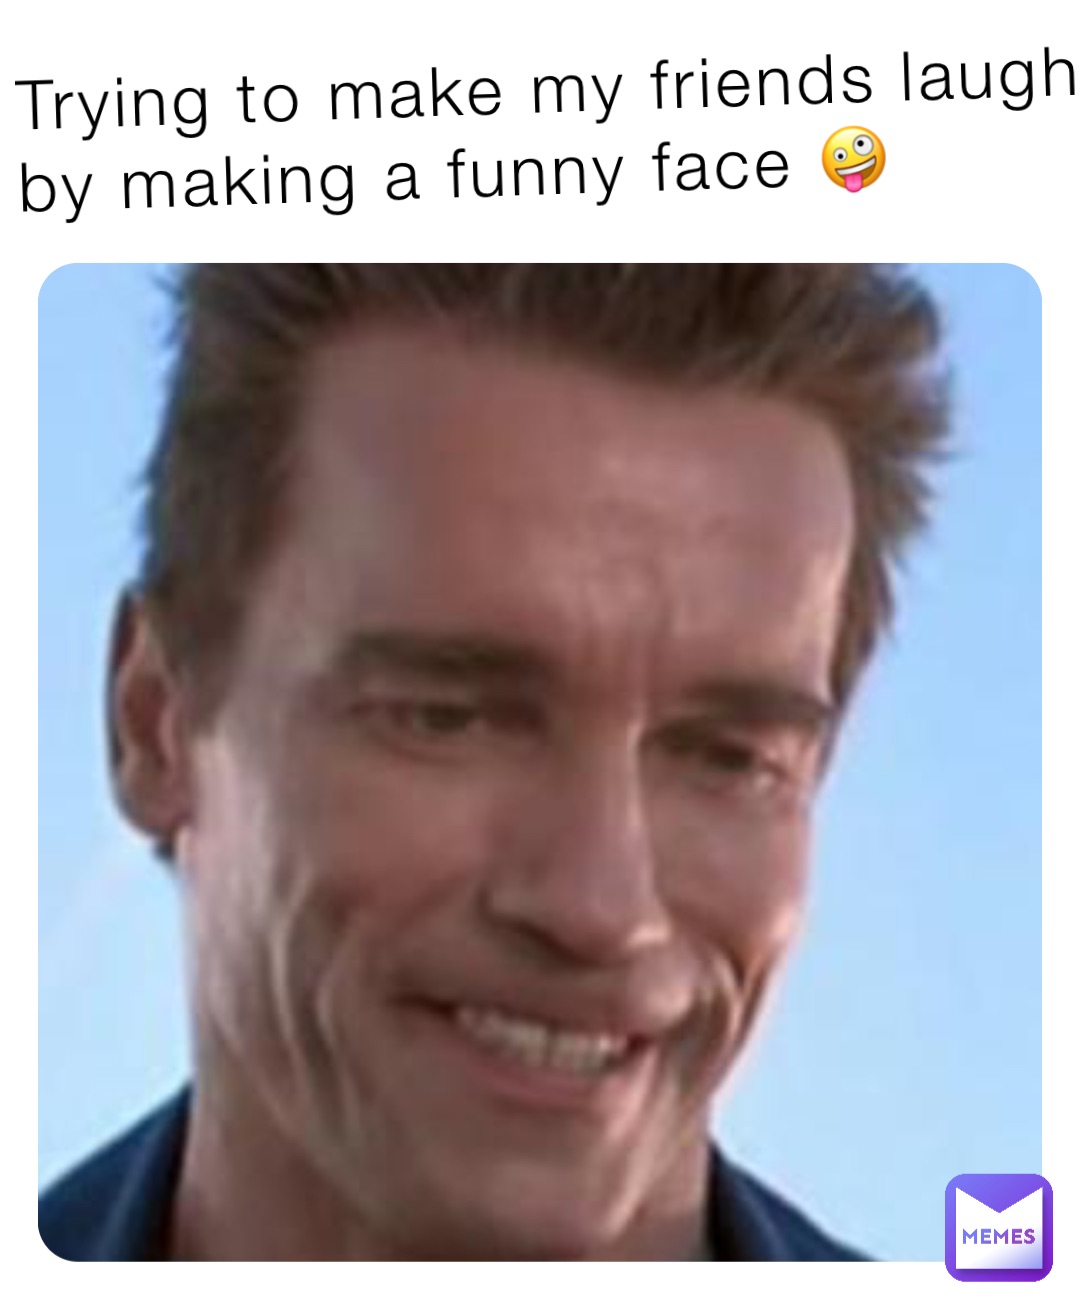 Trying to make my friends laugh by making a funny face 🤪 |  @Meme_Master_111 | Memes